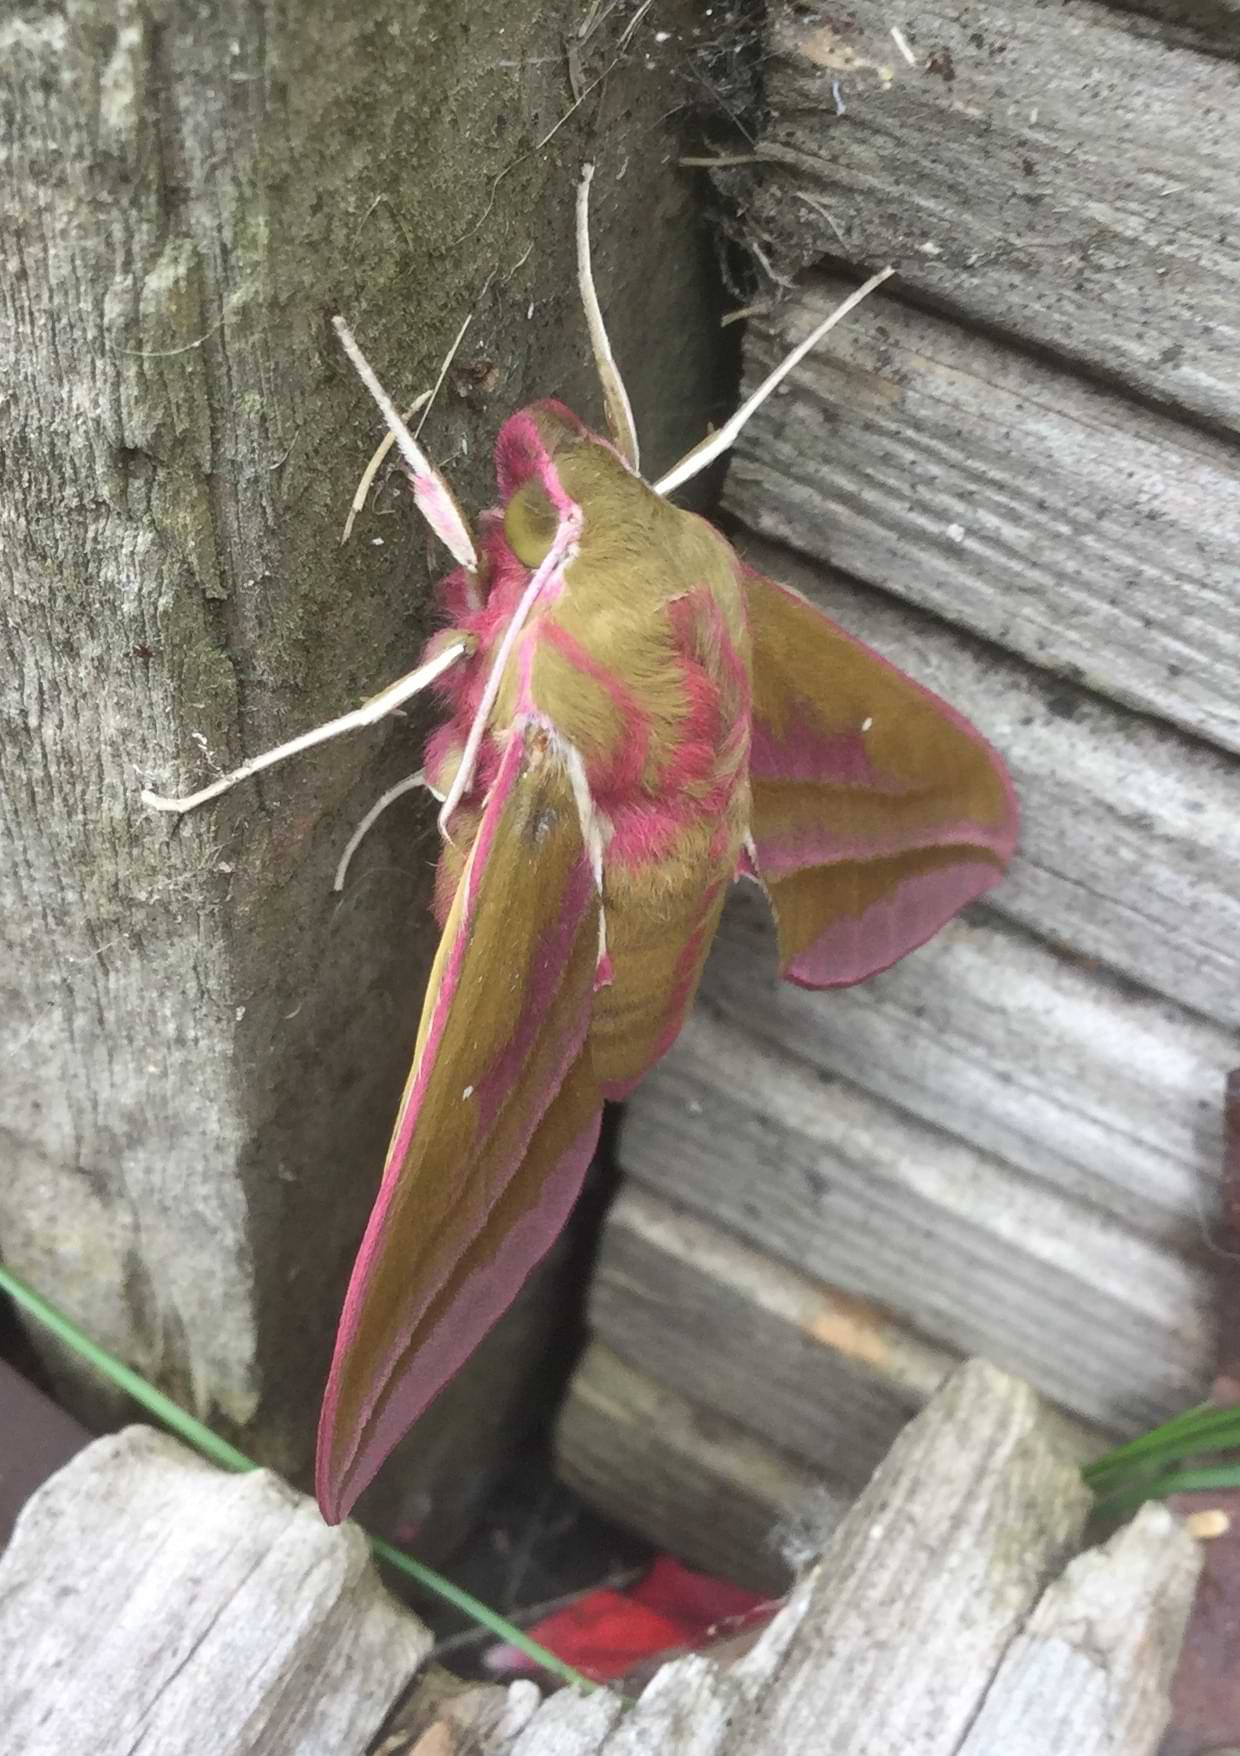 Close up of a large olive-green and pink moth hugging a wooden post. The moth is very fluffy and has banded lines of pink running down its wings and abdomen. Its legs and antennae are bright white and some of the white fur runs down the side of its body in thin lines around the joint of the wings.